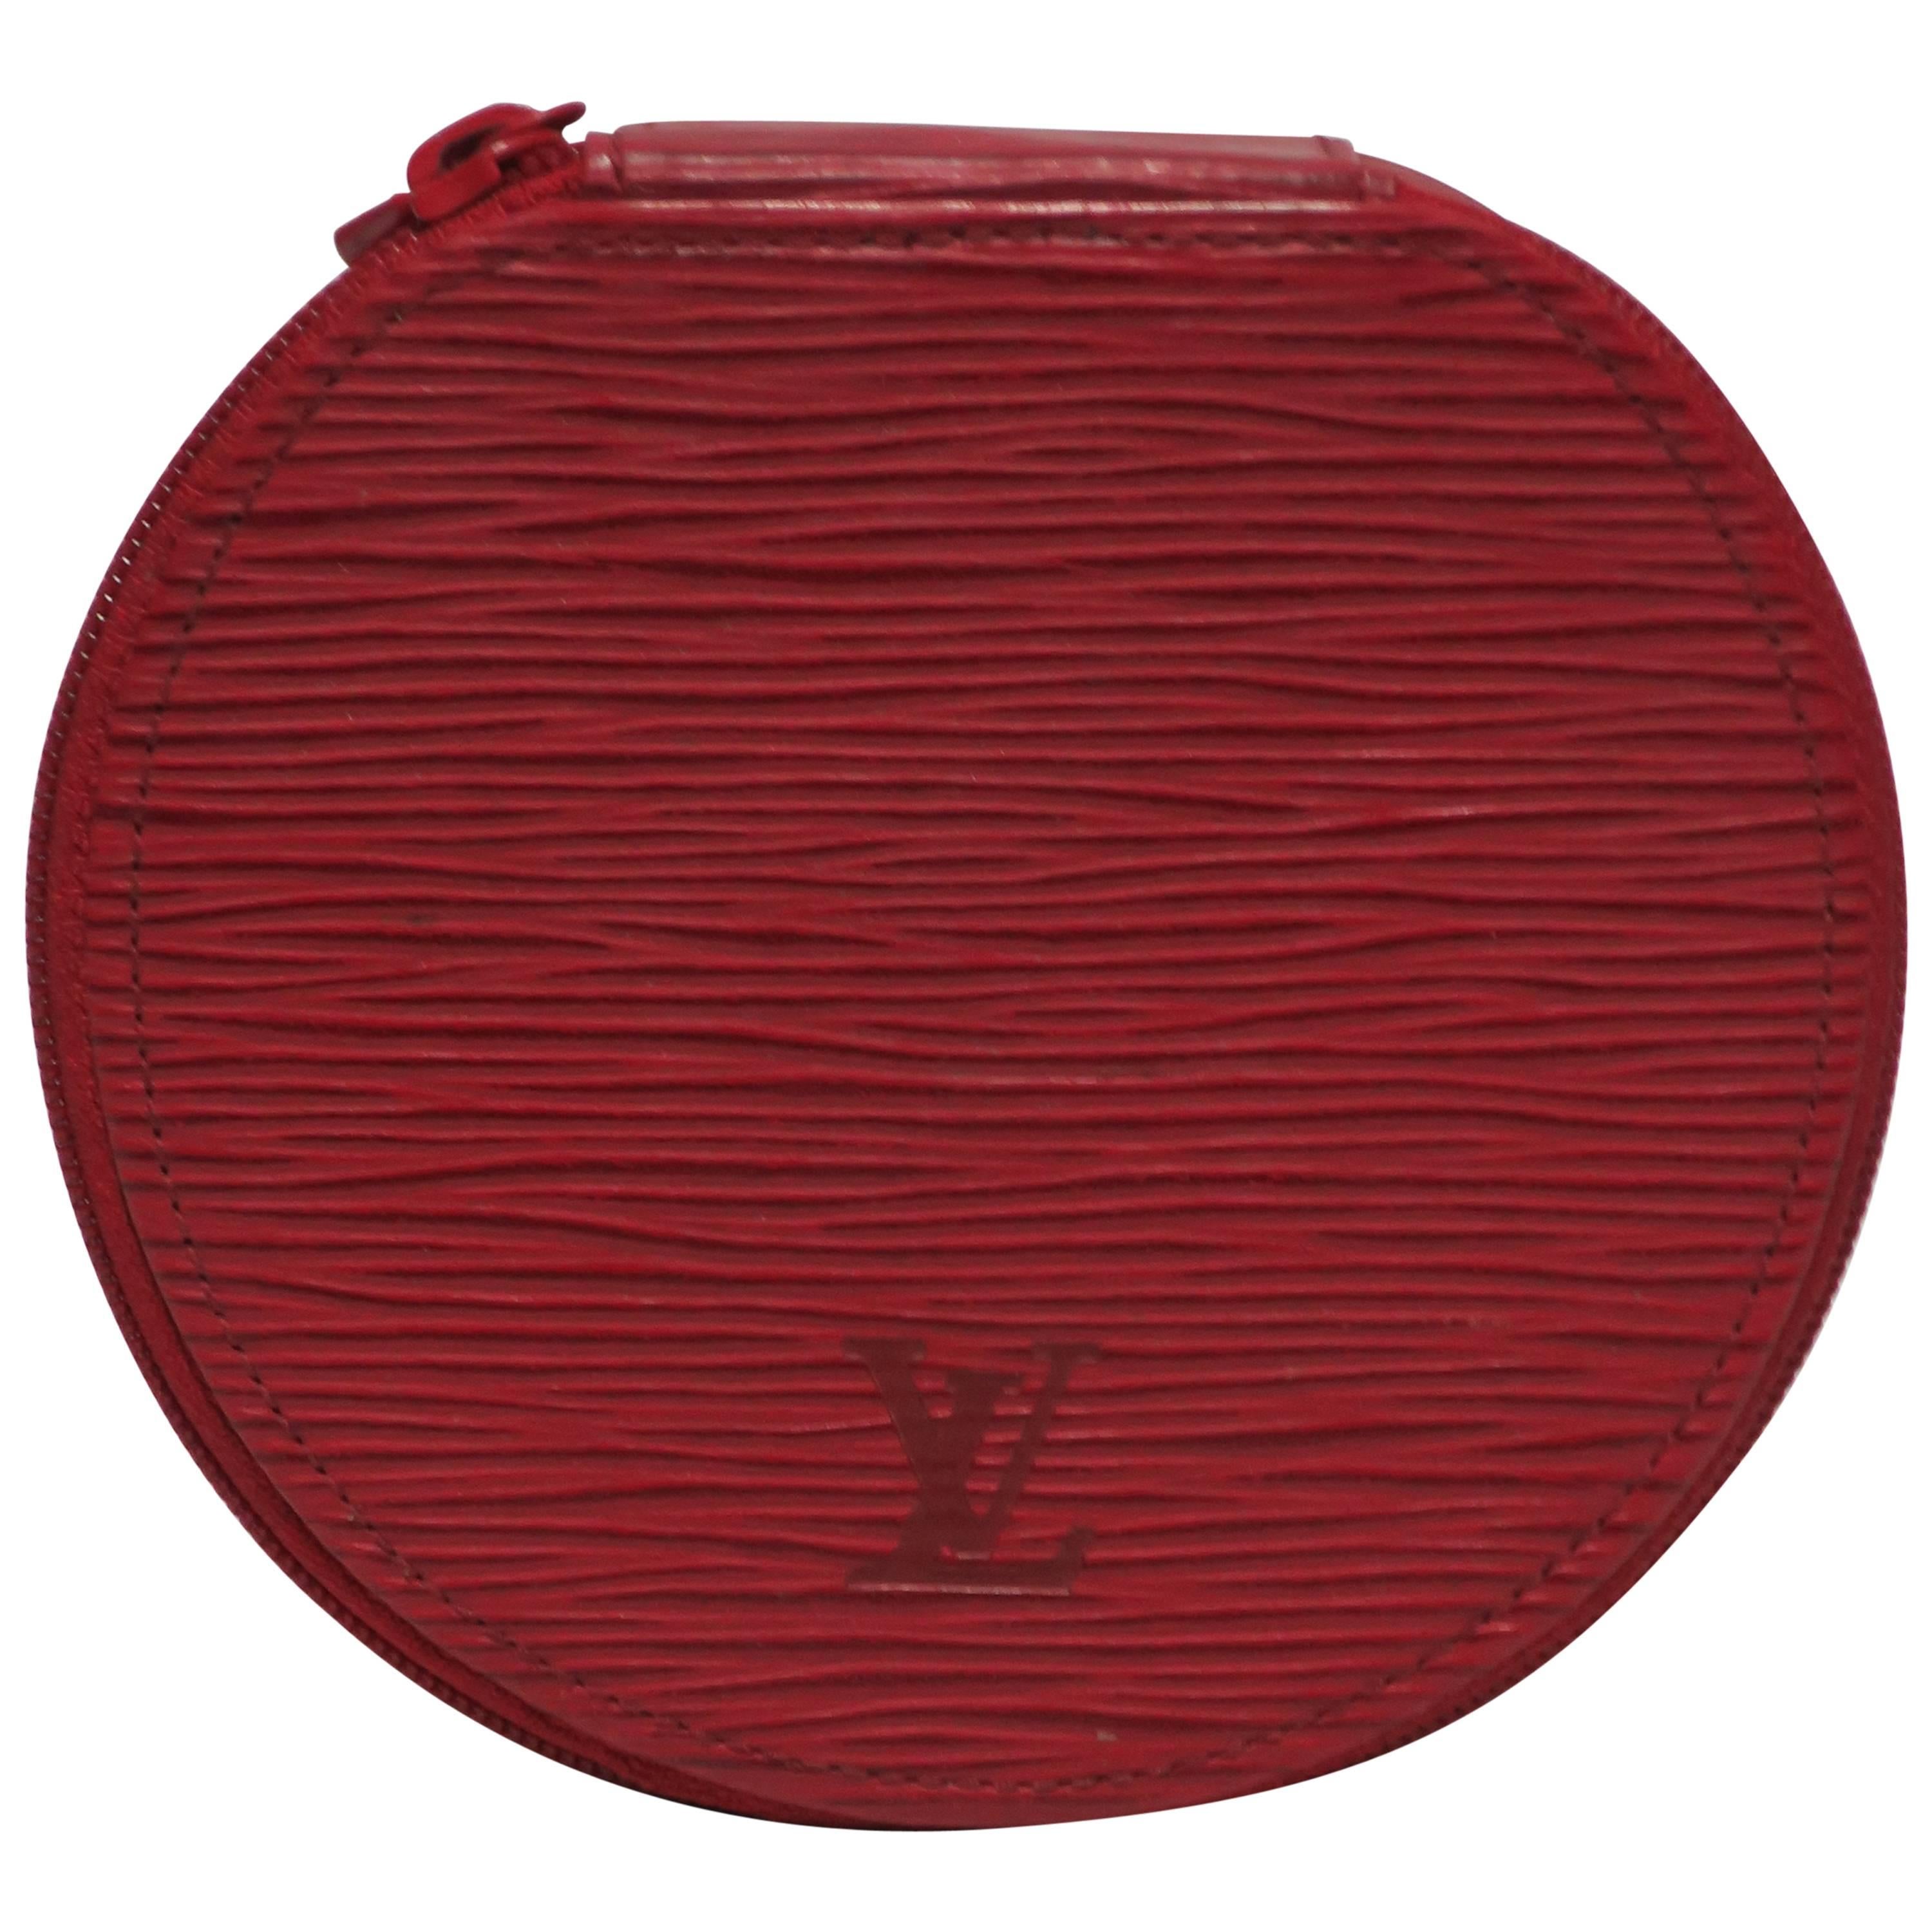 Red LV Louis Vuitton Leather Travel Jewelry Box, from France